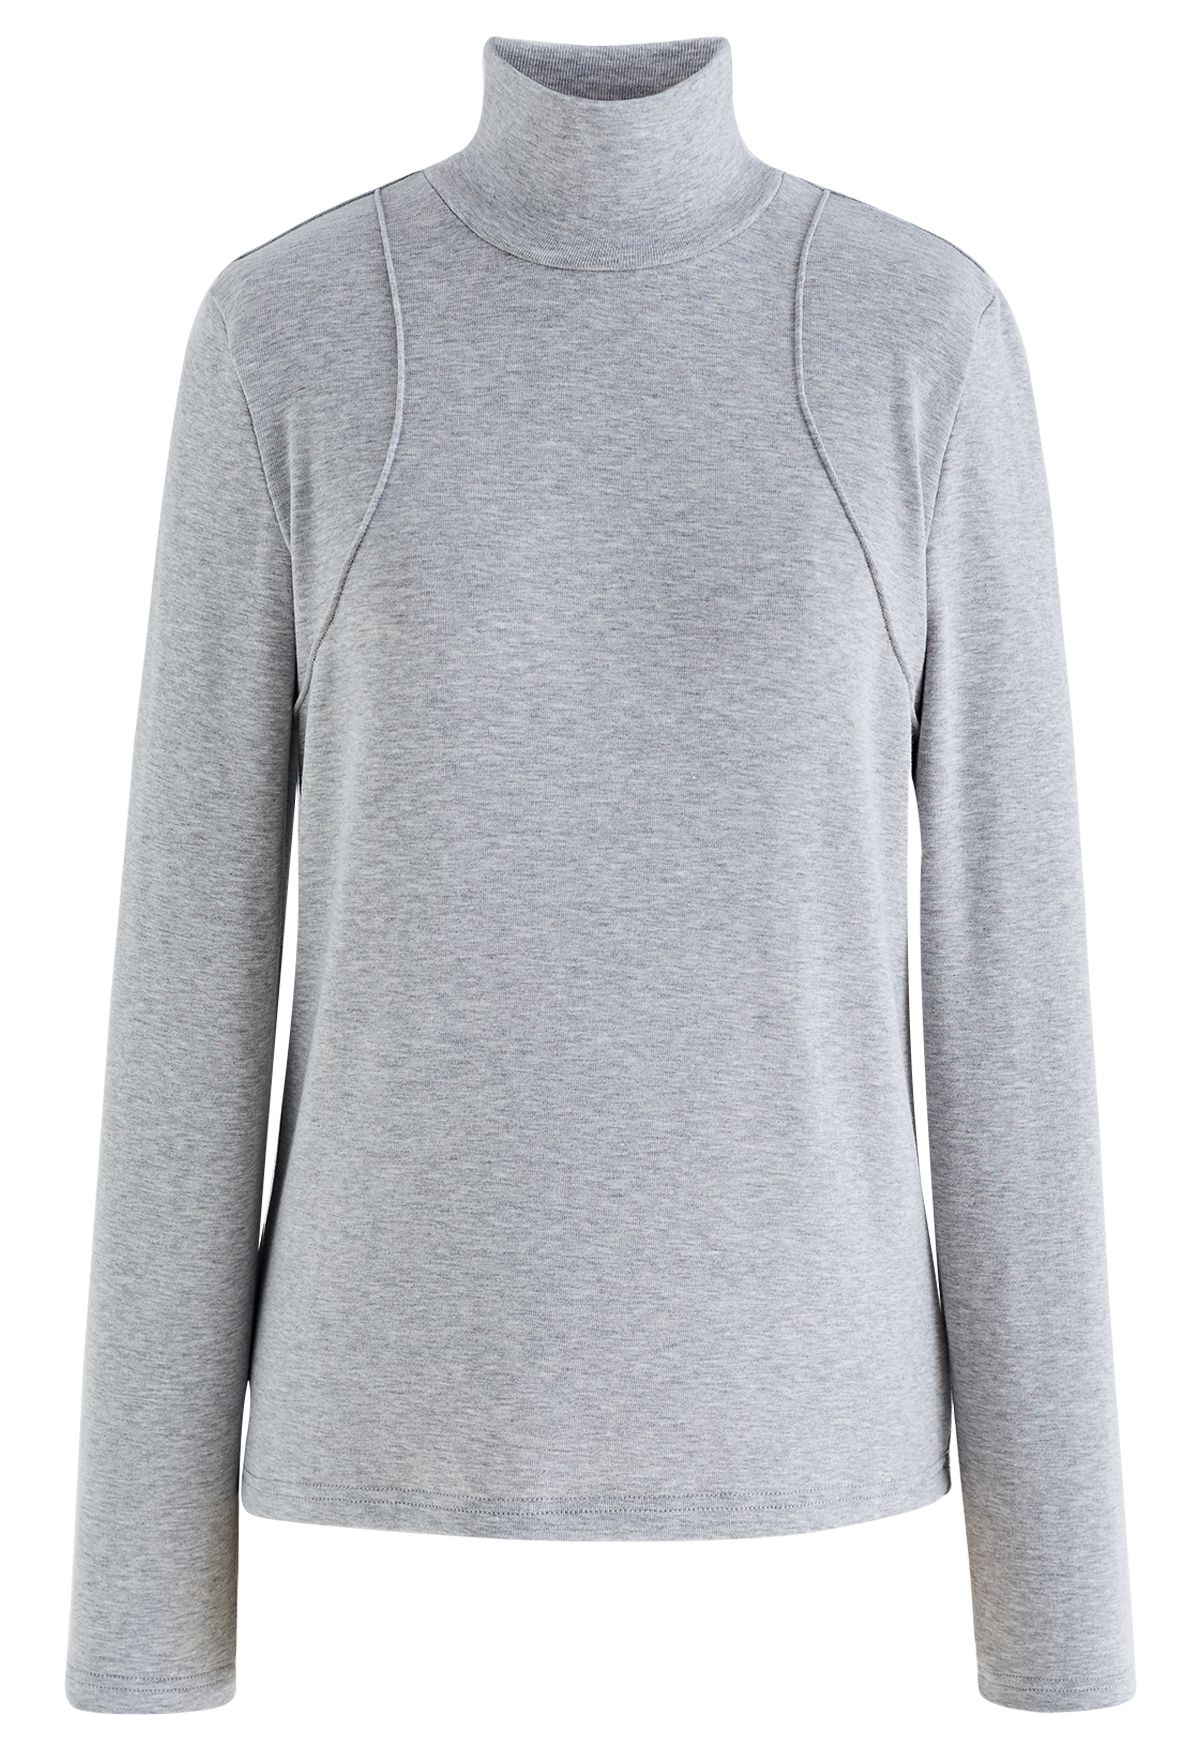 Embossed Seam Detail High Neck Knit Top in Grey